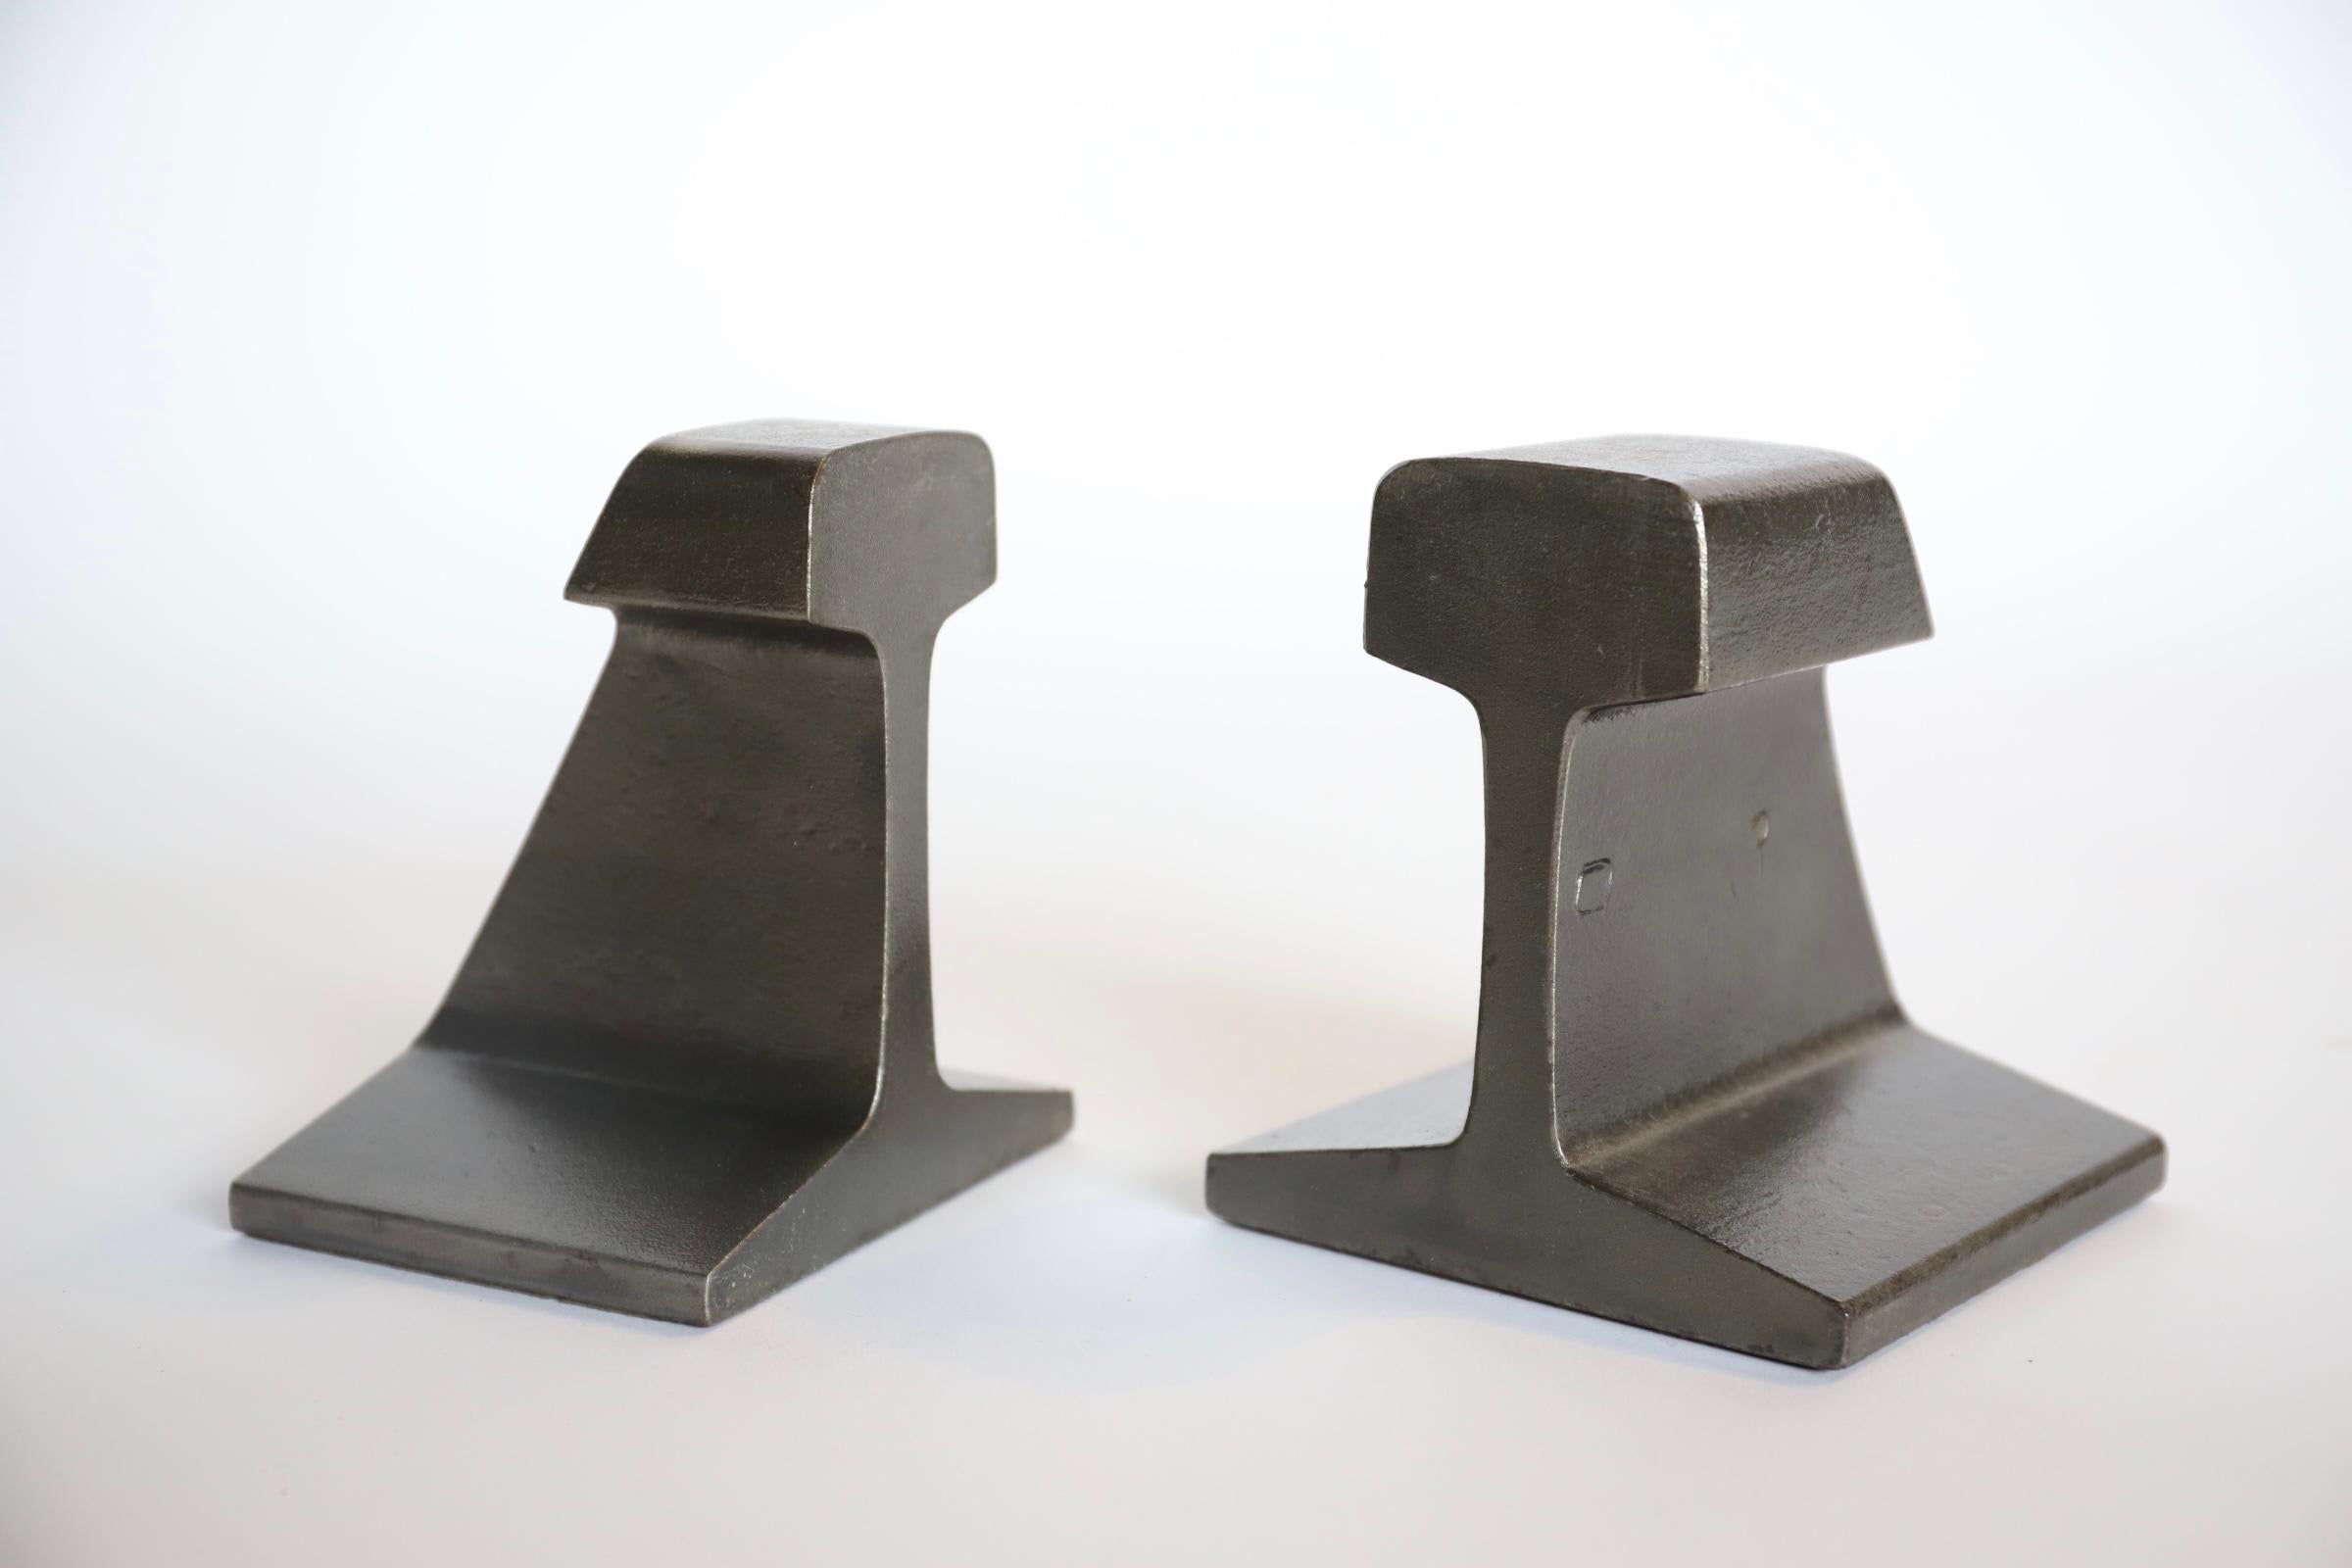 Fun whimsical solid iron railroad tie bookends. Raw metal with clear coat and original felt bottoms. A wonderful addition to any designer interior space. Pictured with magazine sized Los Angeles Modern Auction catalogs for scale.